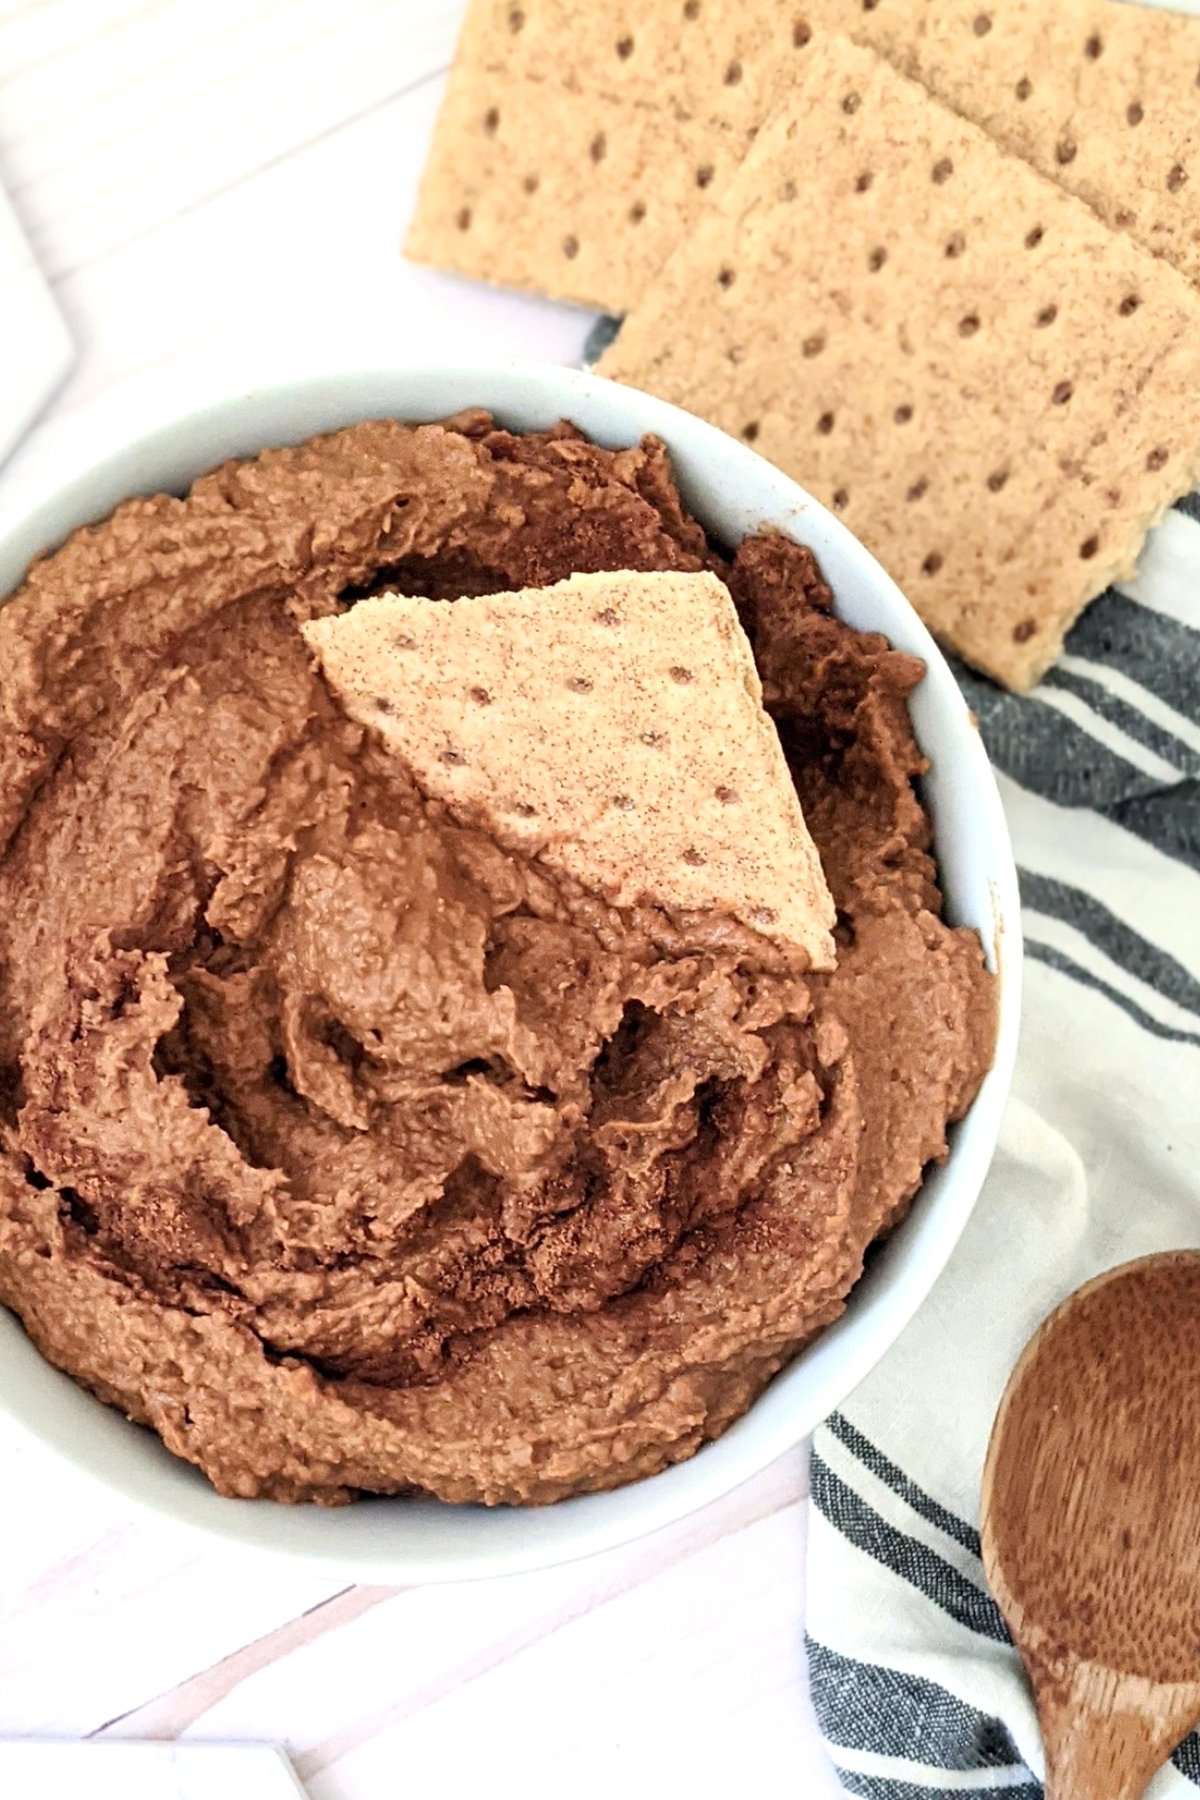 chickpea desserts no bake recipes hummus with cacao dessert hummus for fall autumn desserts with beans and chocolate snacks dip vegan gluten free bean sweet bean dip